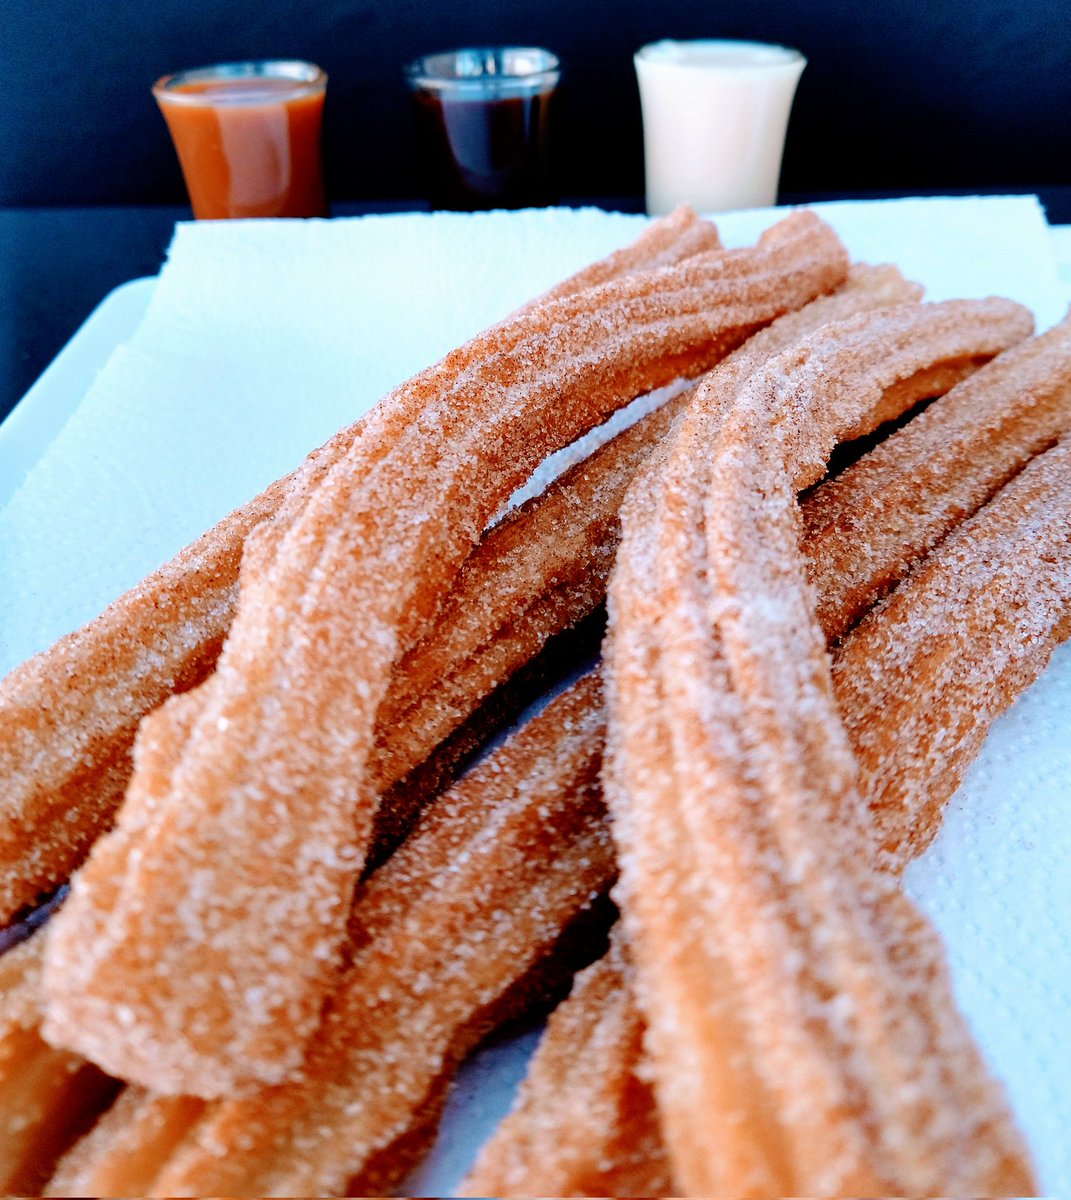 Delicious  Regular Churros or with caramel, chocolate or condensed Milk, the perfect option for your next event!  Dm to book 909 272 1328

#ortizicecream #fypシ゚viralシ #sanbernardinocounty